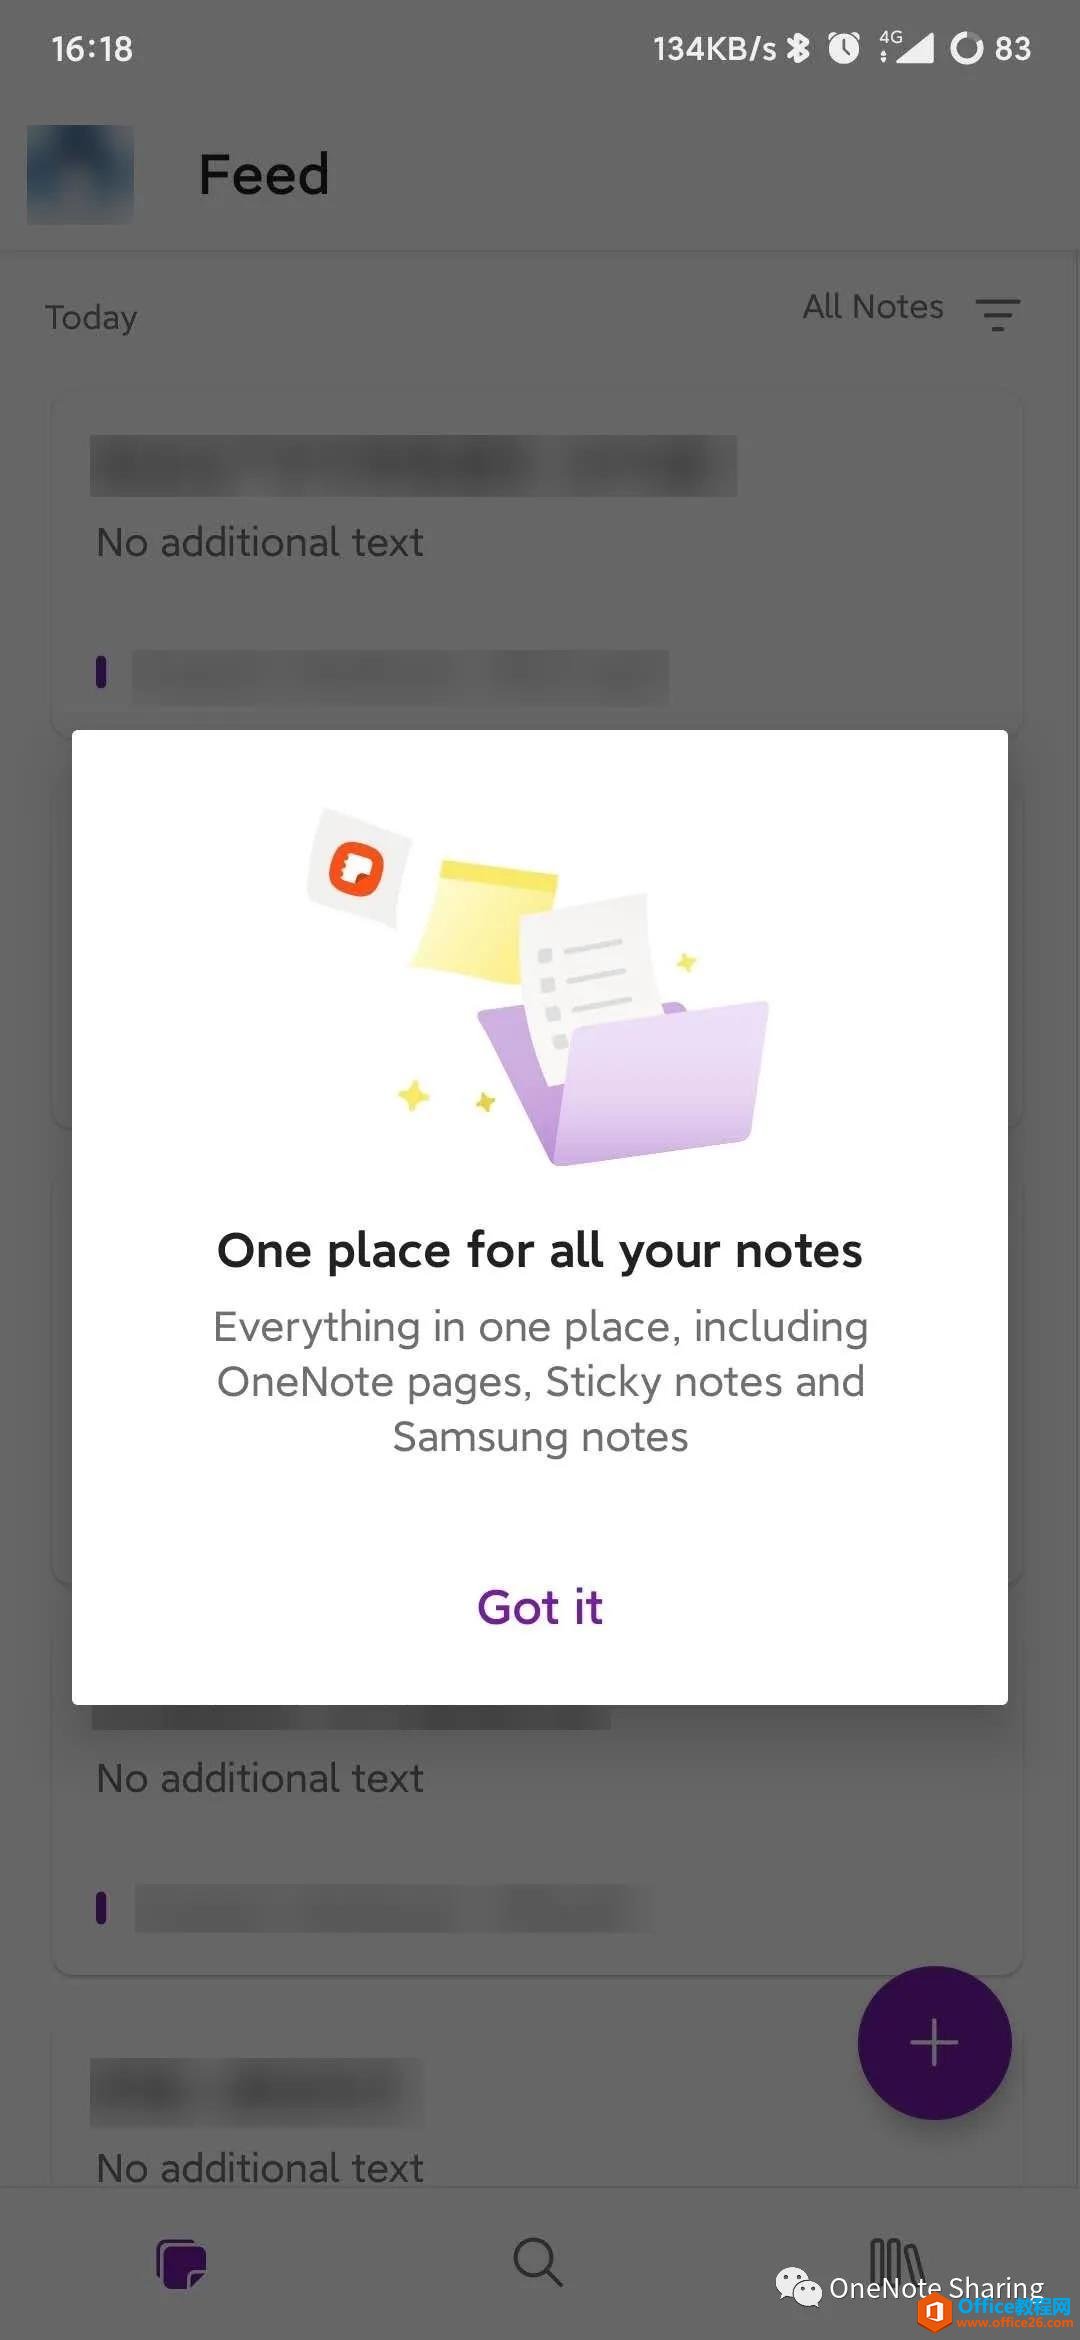 OneNote for Android UI界面大改！默认主页Feed时间线1